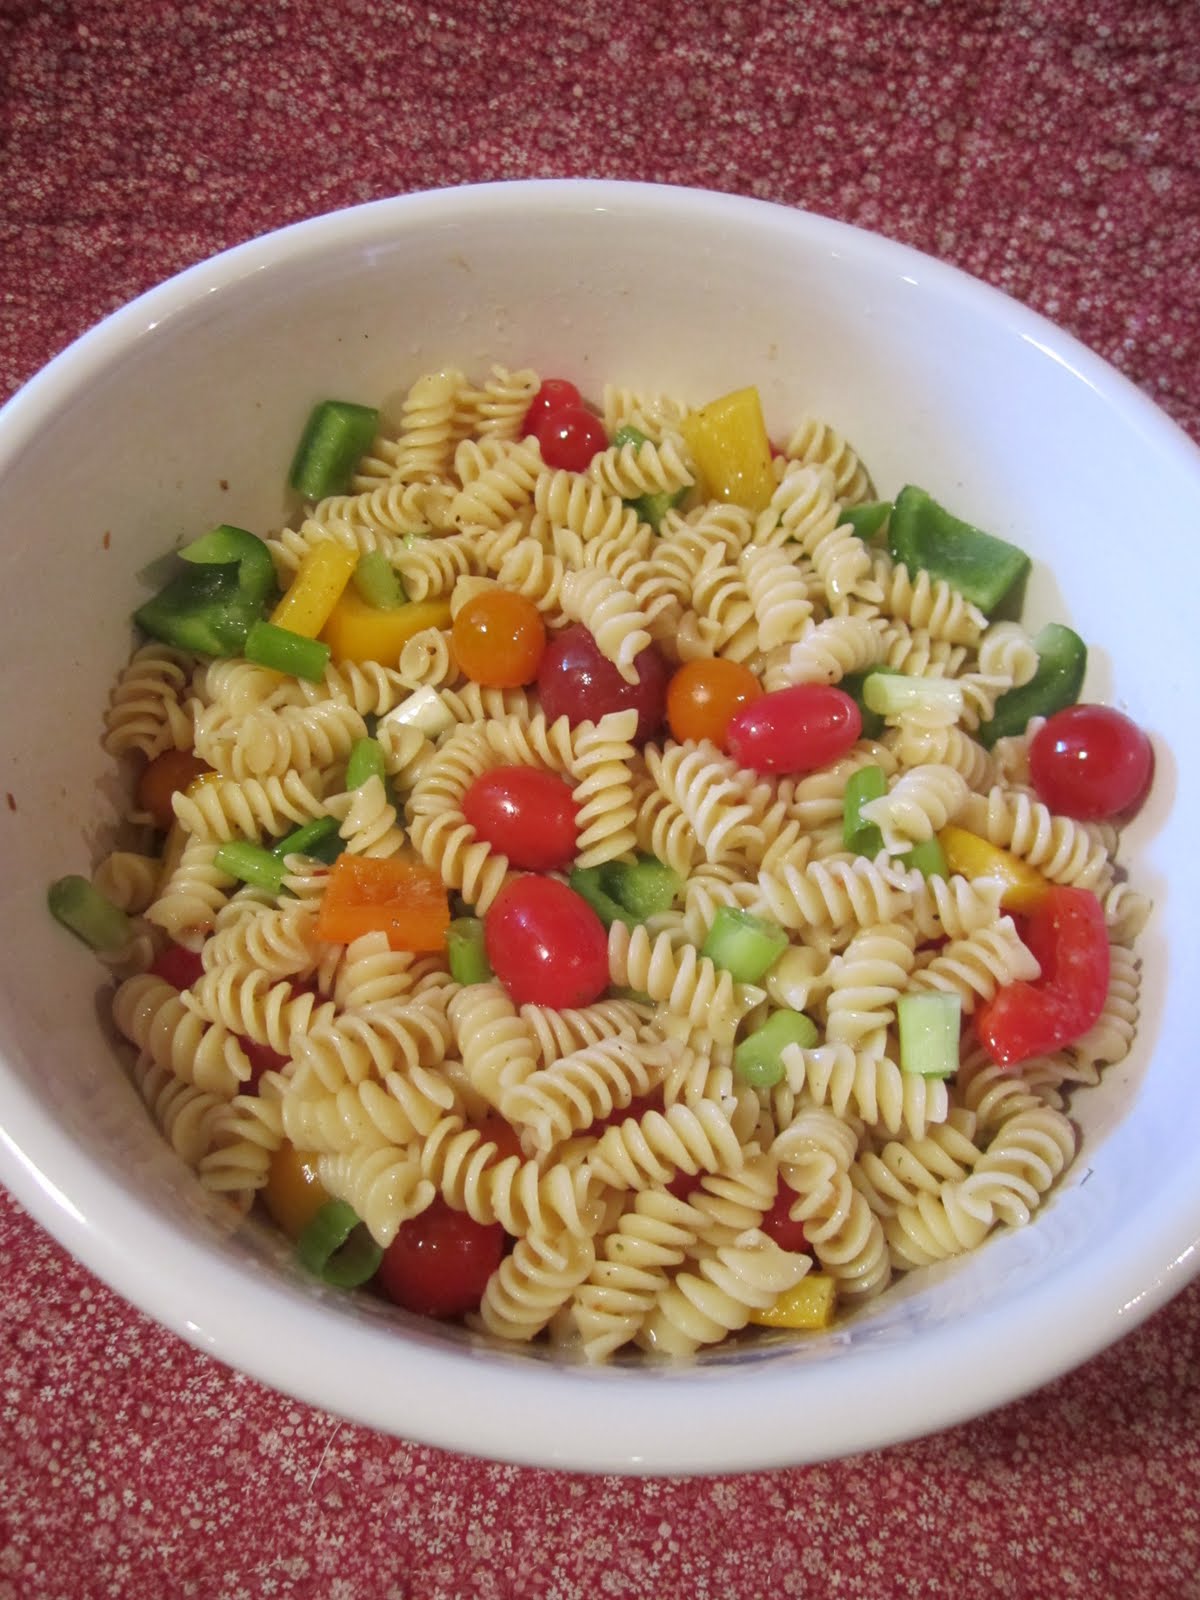 Wendys Hat: How to Make a Cold Pasta Salad {Recipe}